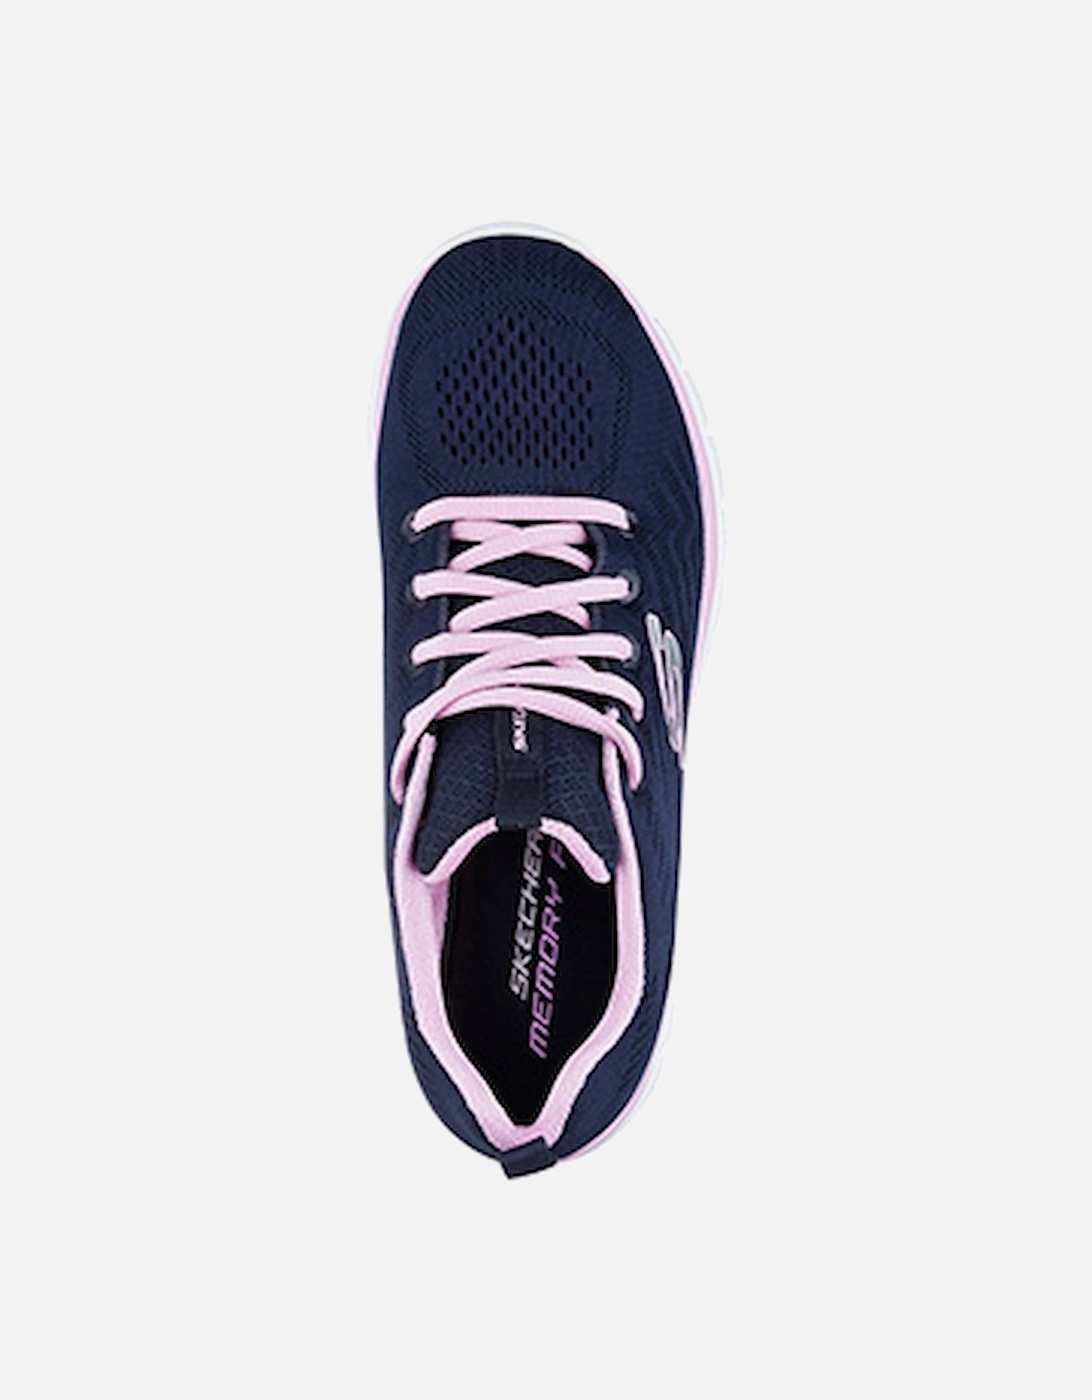 Women's Graceful Get Connected Sports Shoe Navy/Pink